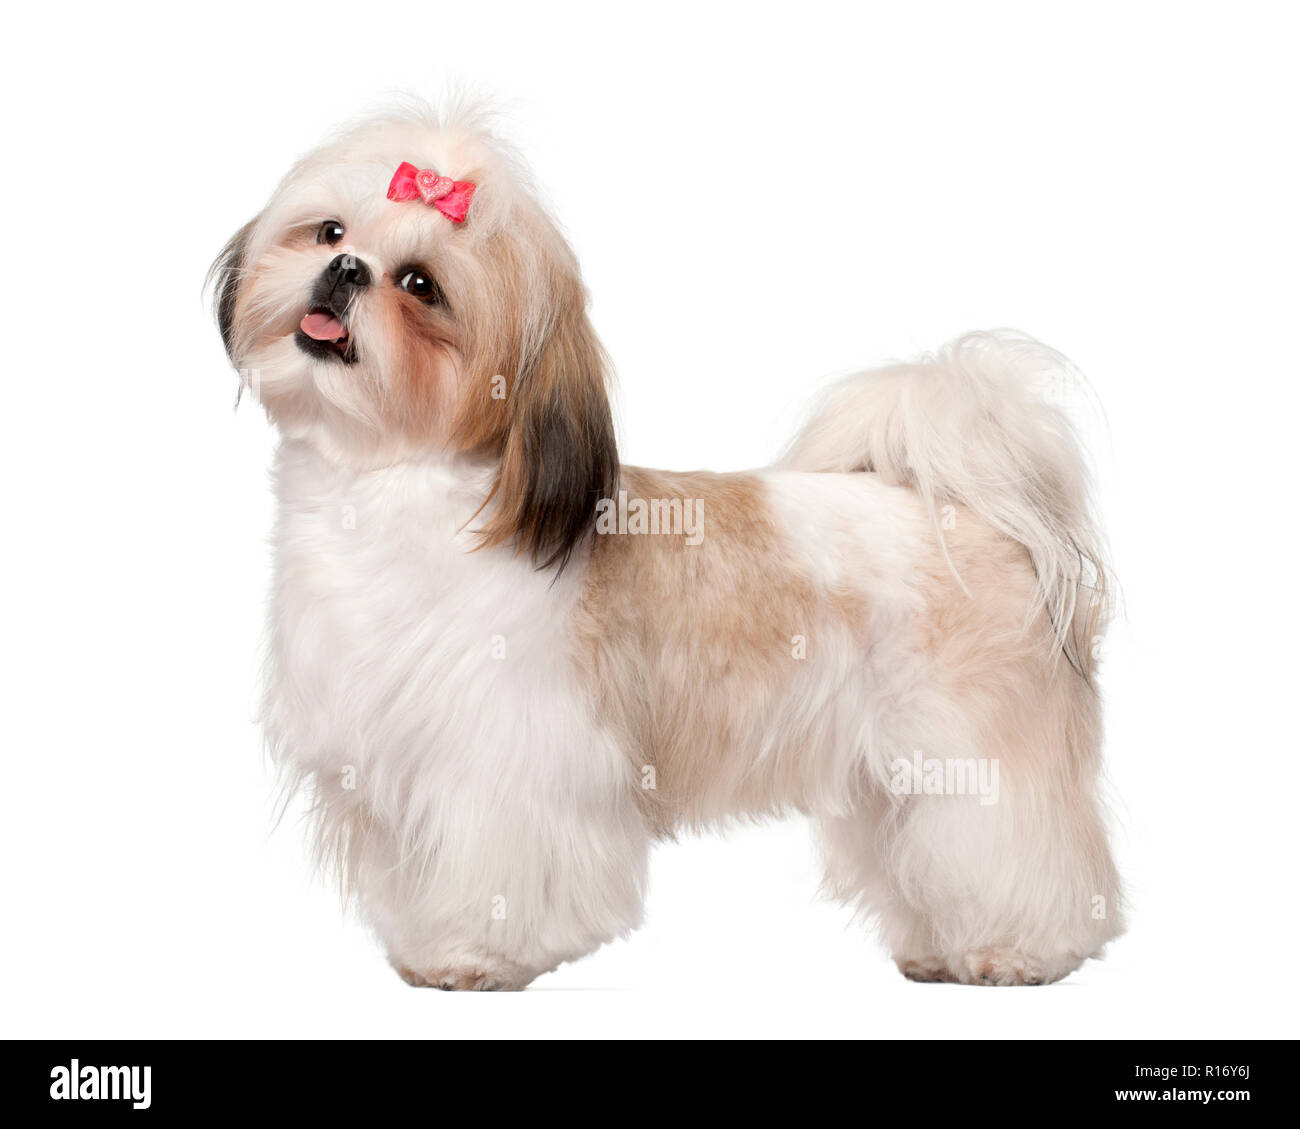 Shih Tzu standing against white background Banque D'Images